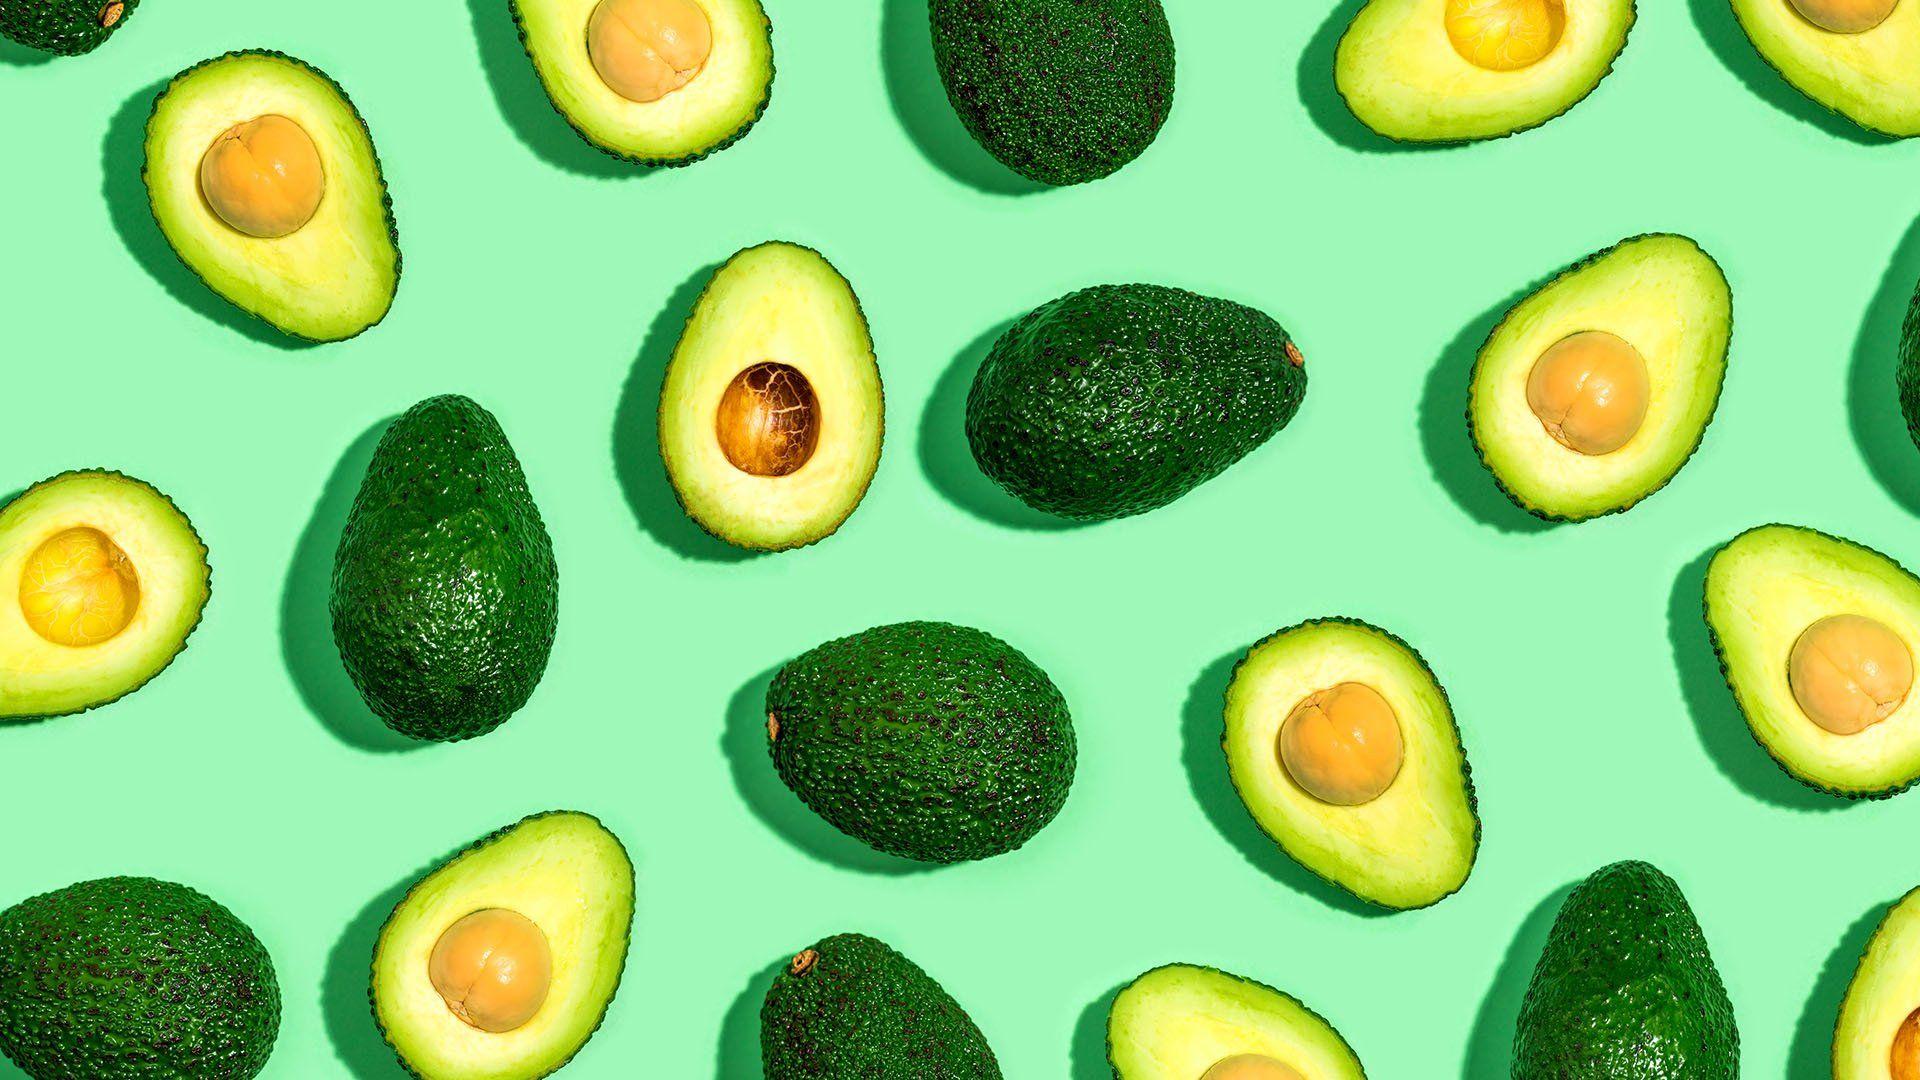 Two Cute Avocados Illustration For Wallpaper Or Background Wallpaper Image  For Free Download  Pngtree